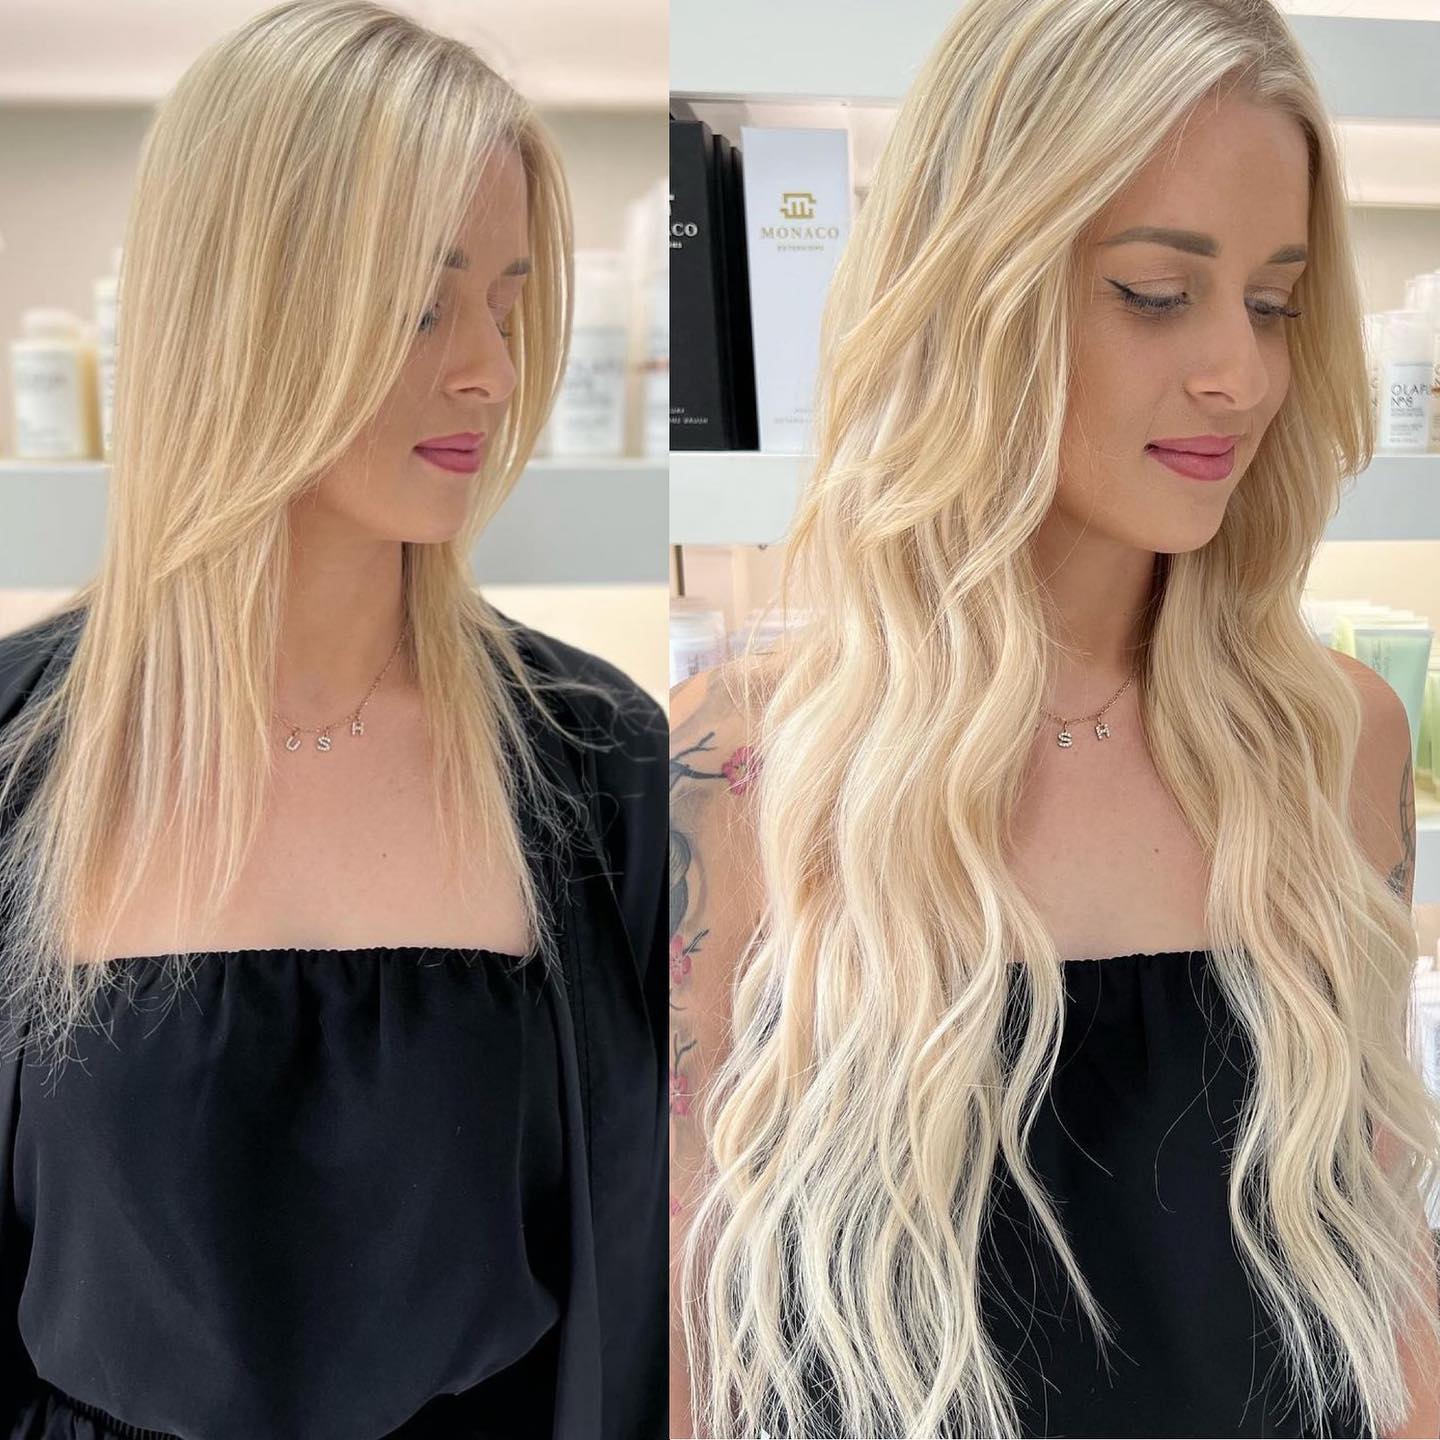 Hand Tied Extensions Archives - Invisible Bead Extensions